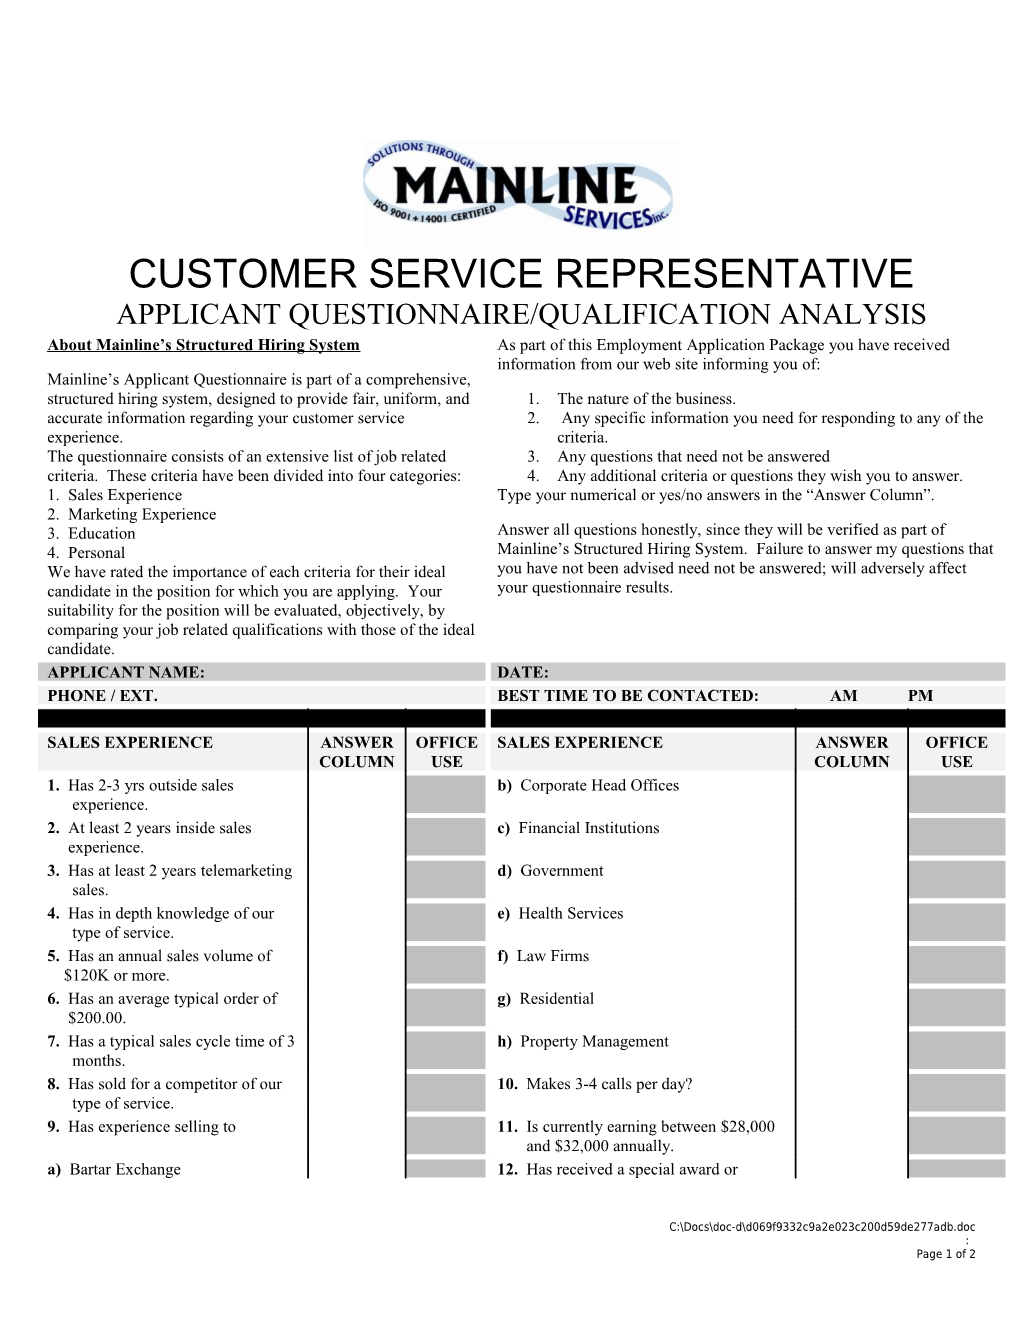 Applicant Questionnaire/Qualification Analysis